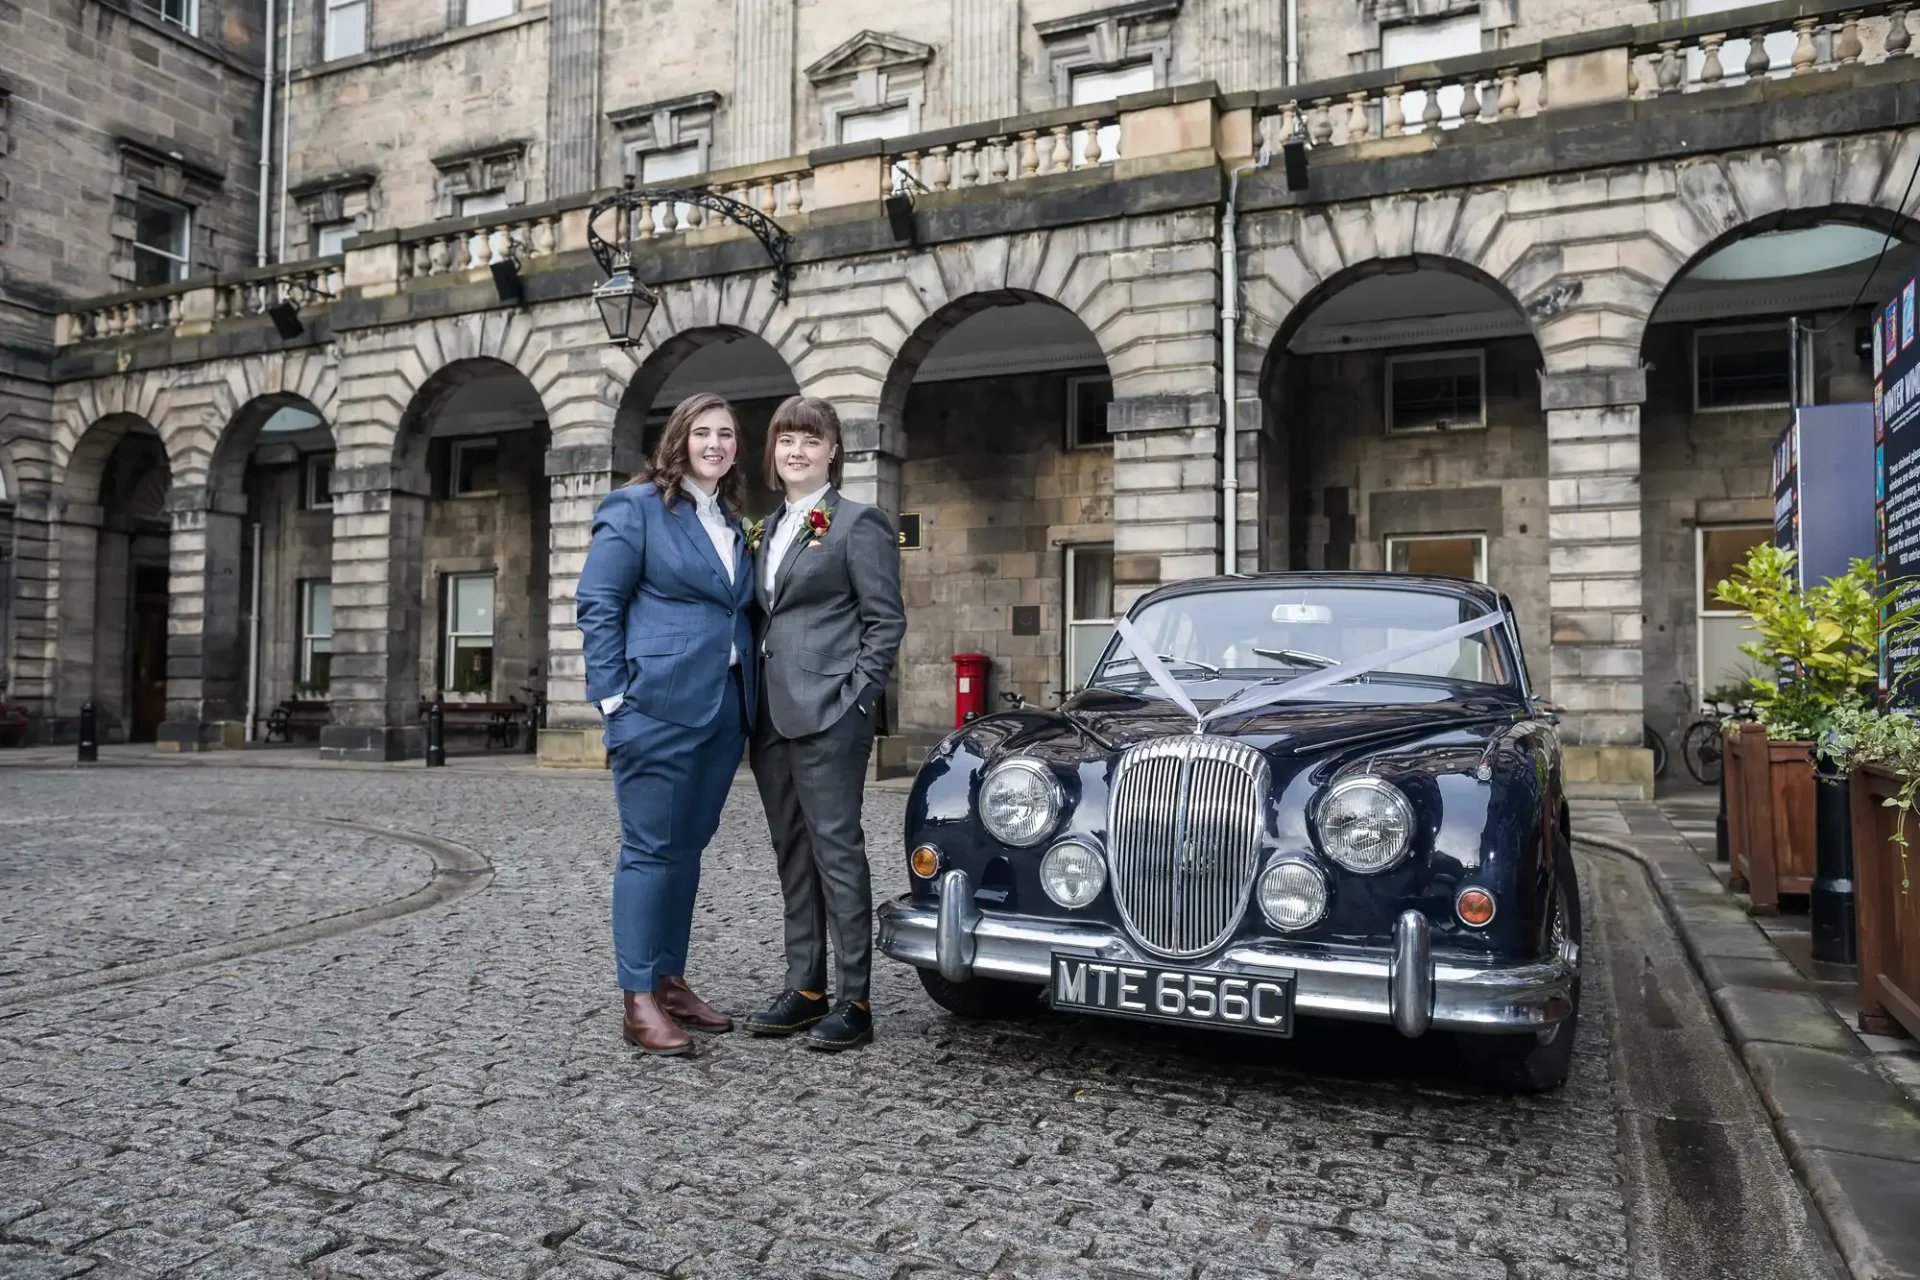 Two newlywed ladies in wedding suit attire stand side by side on a cobblestone street, in front of an ornate building and a vintage car with the license plate MTE 656C.